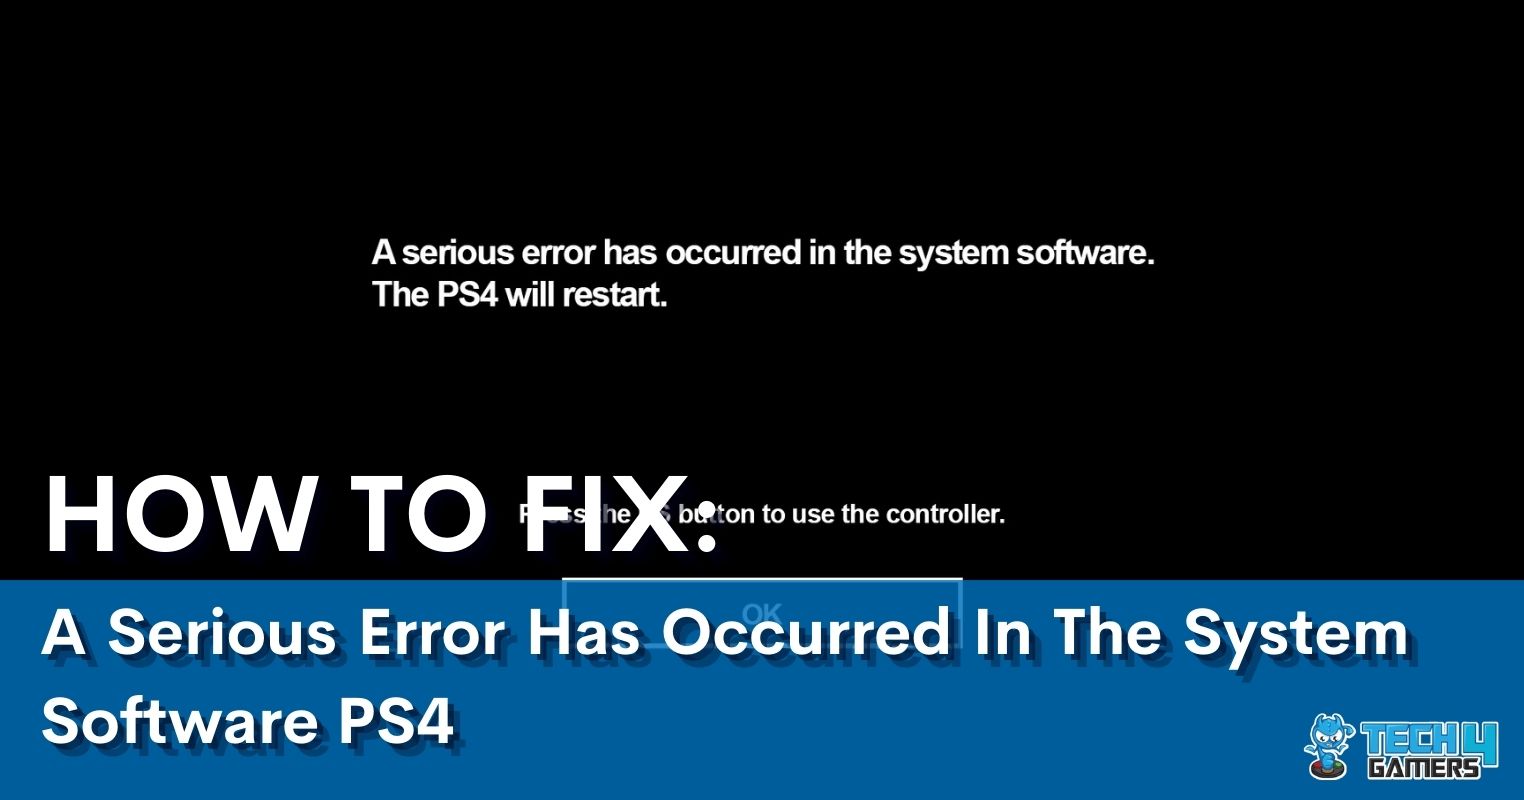 A Serious Error Has Occurred In The System Software PS4